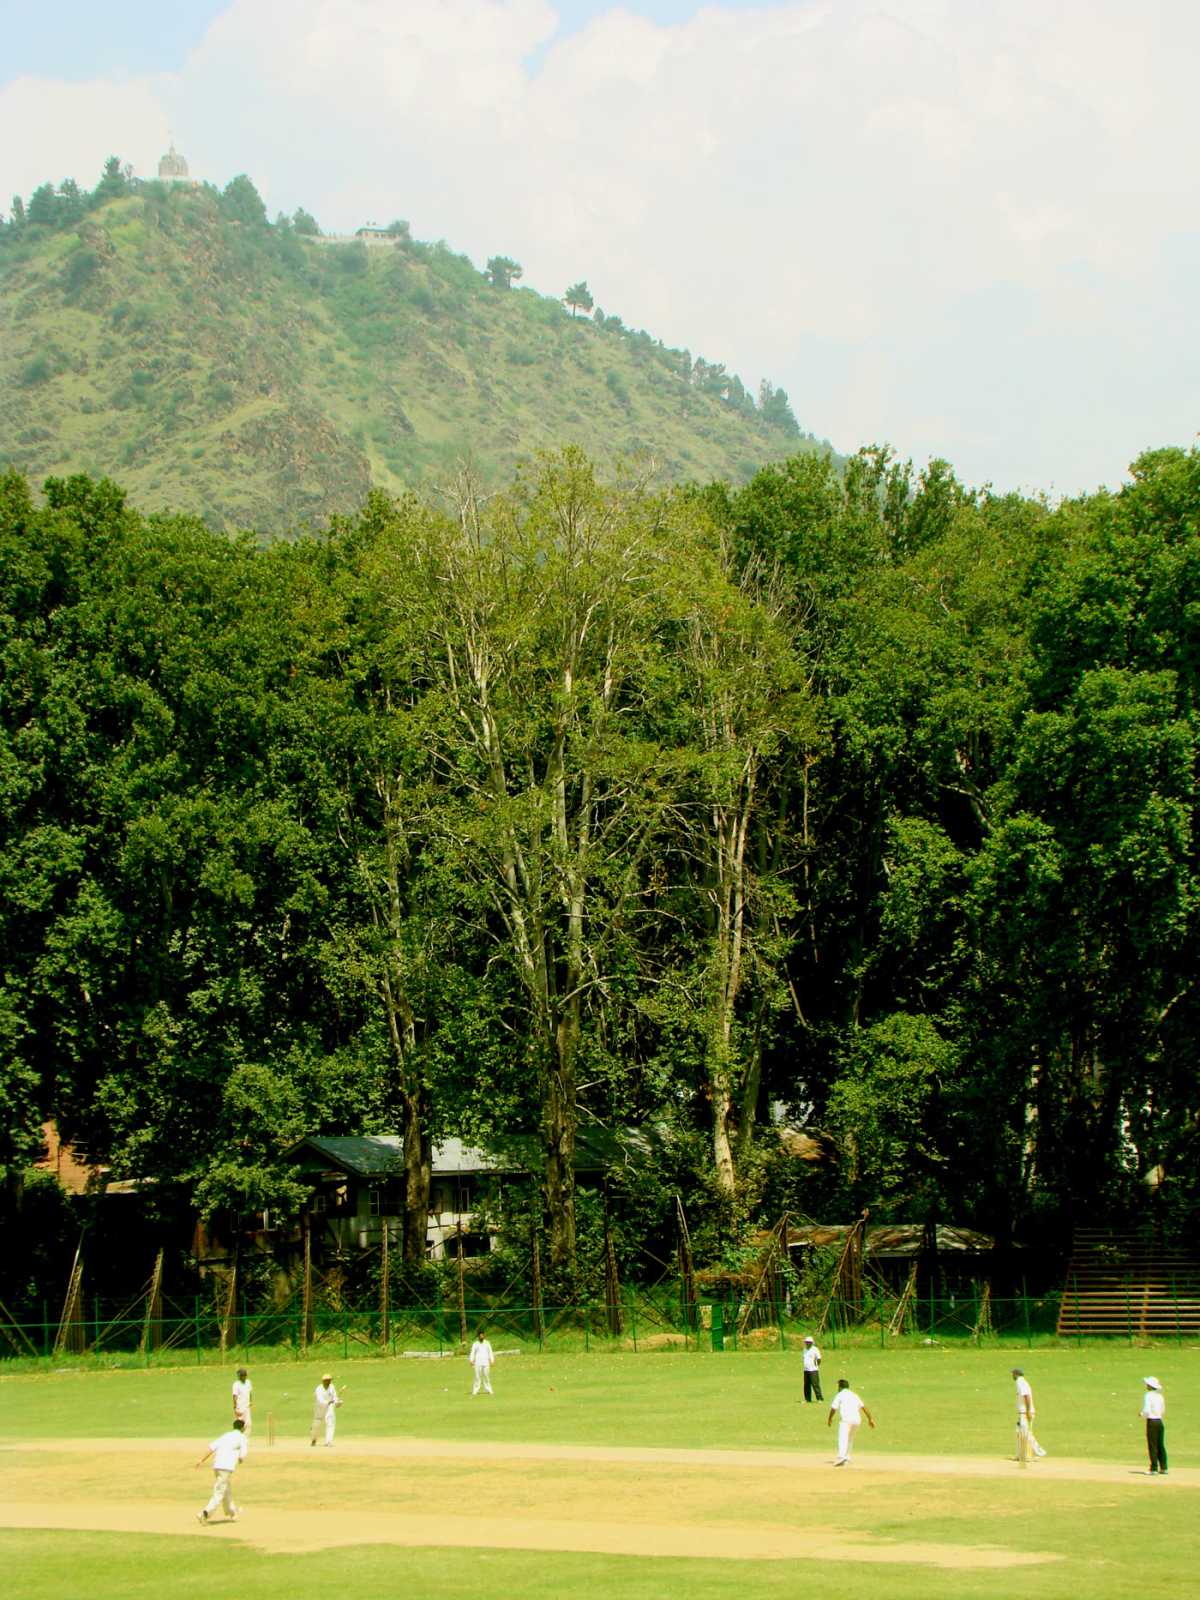 A districts selection trial match at the Sher-i-Kashmir Stadium in Srinagar